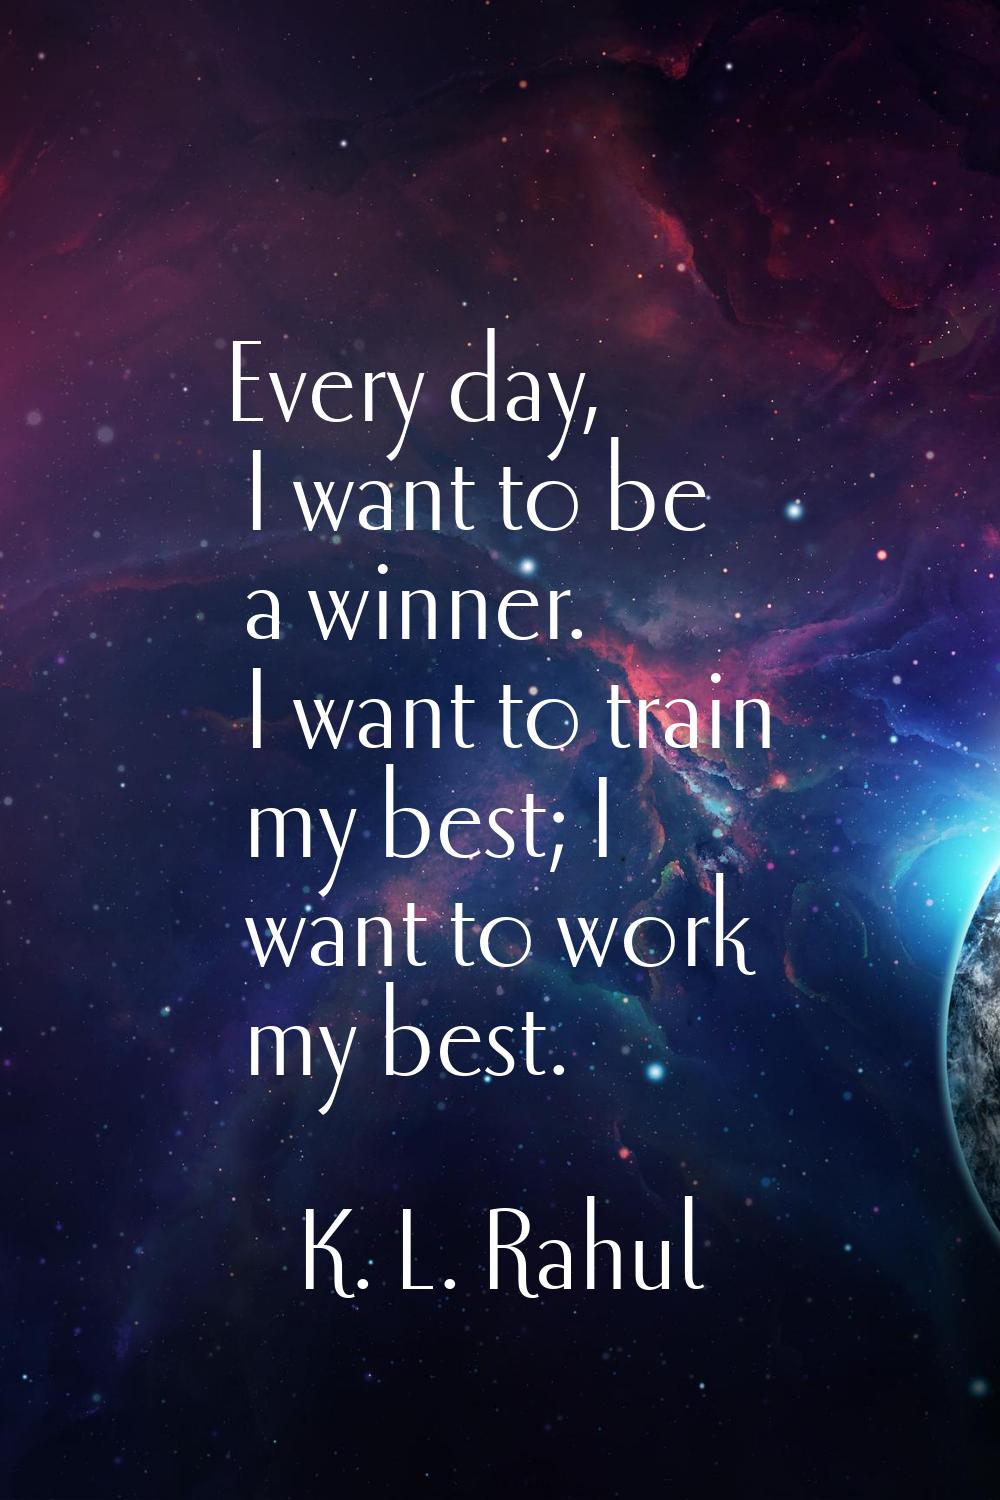 Every day, I want to be a winner. I want to train my best; I want to work my best.